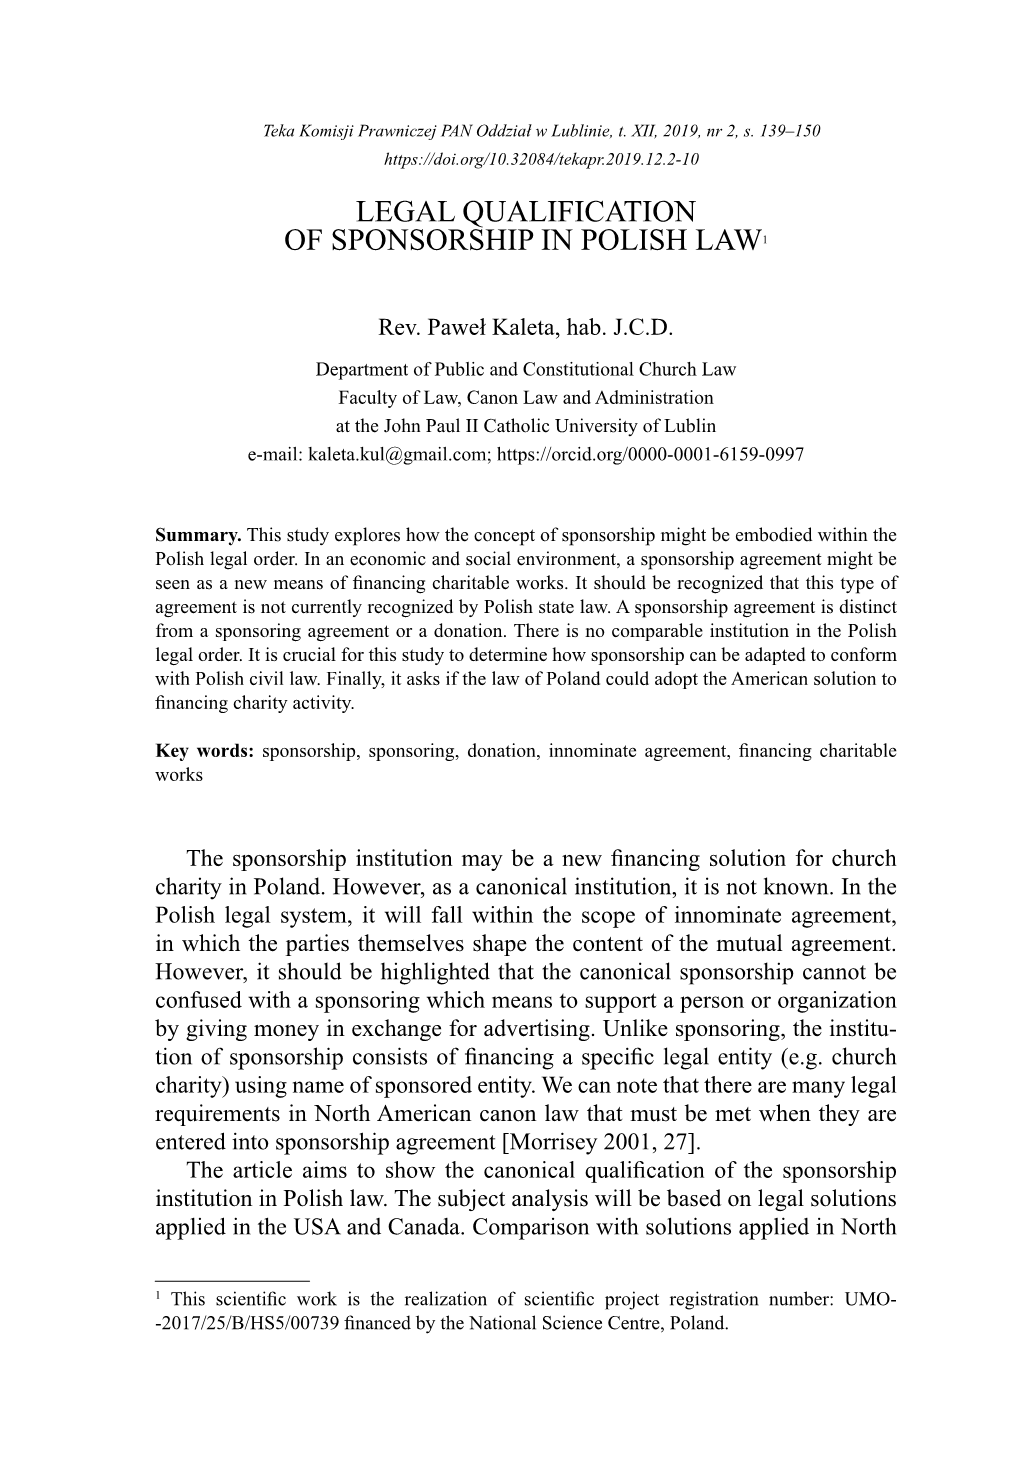 Legal Qualification of Sponsorship in Polish Law1